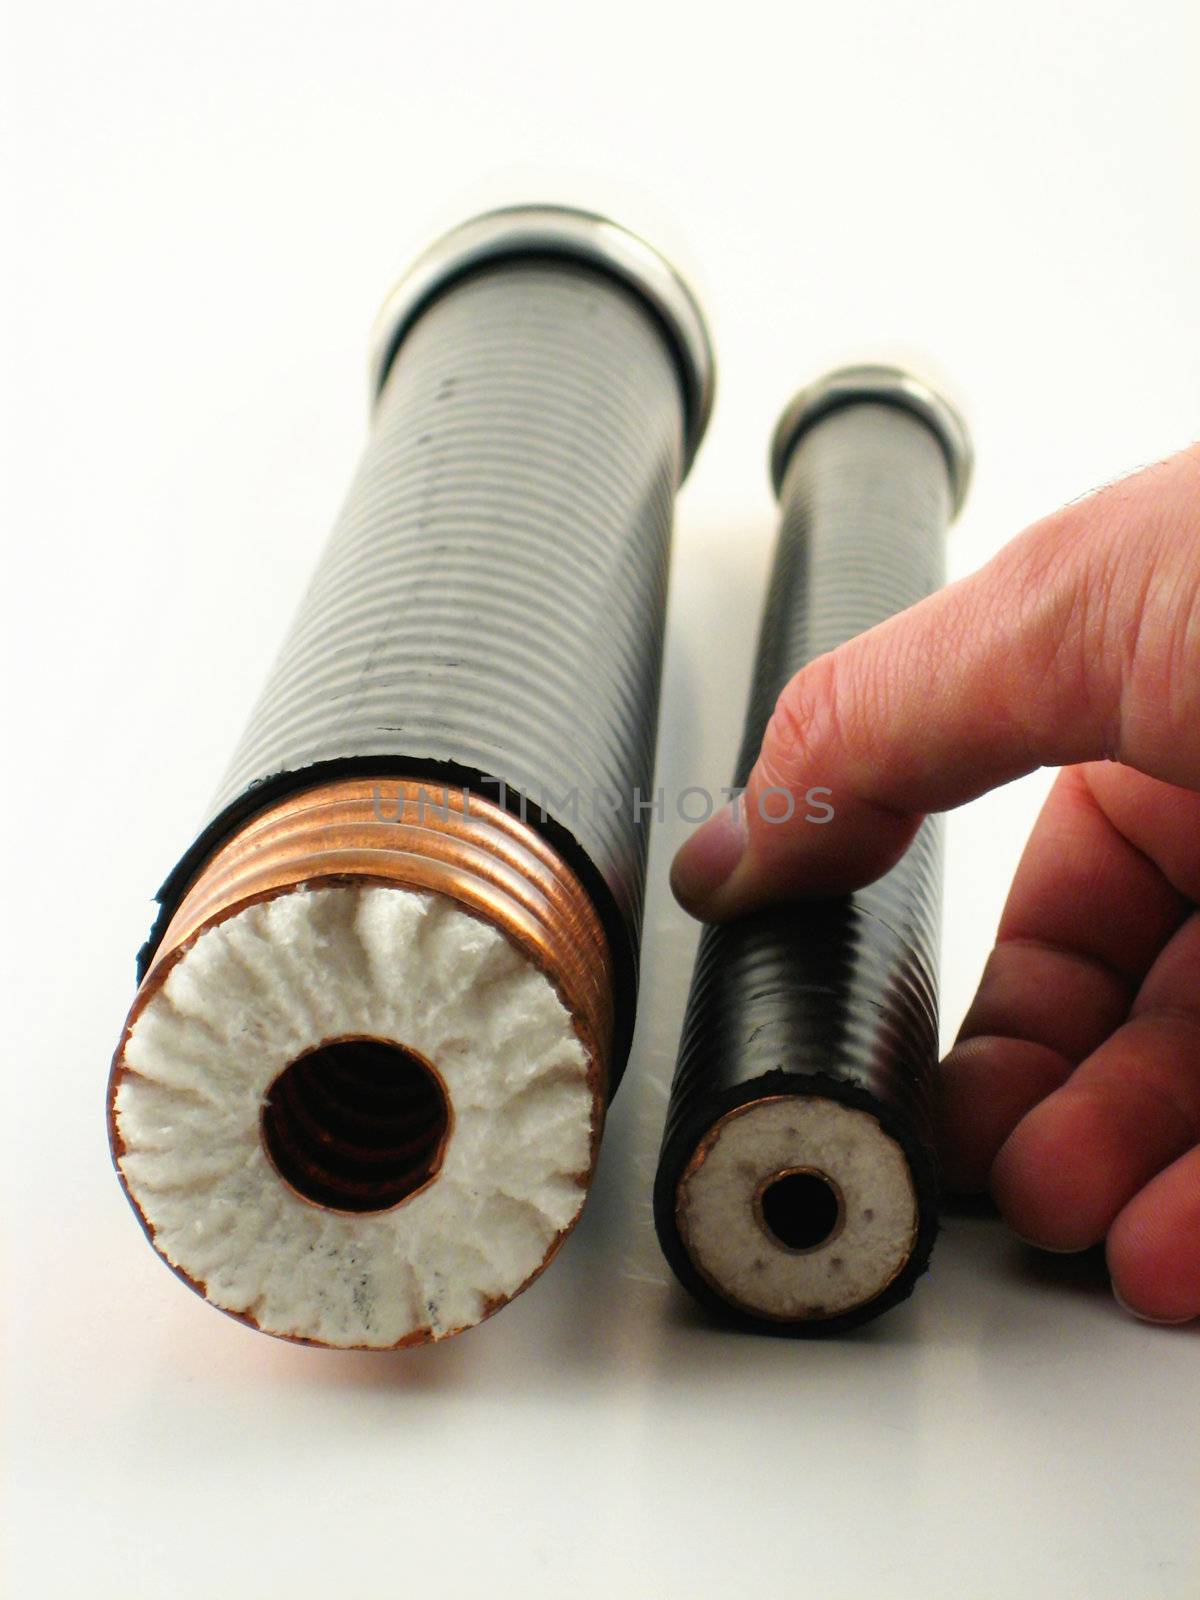 Two large coaxial cables